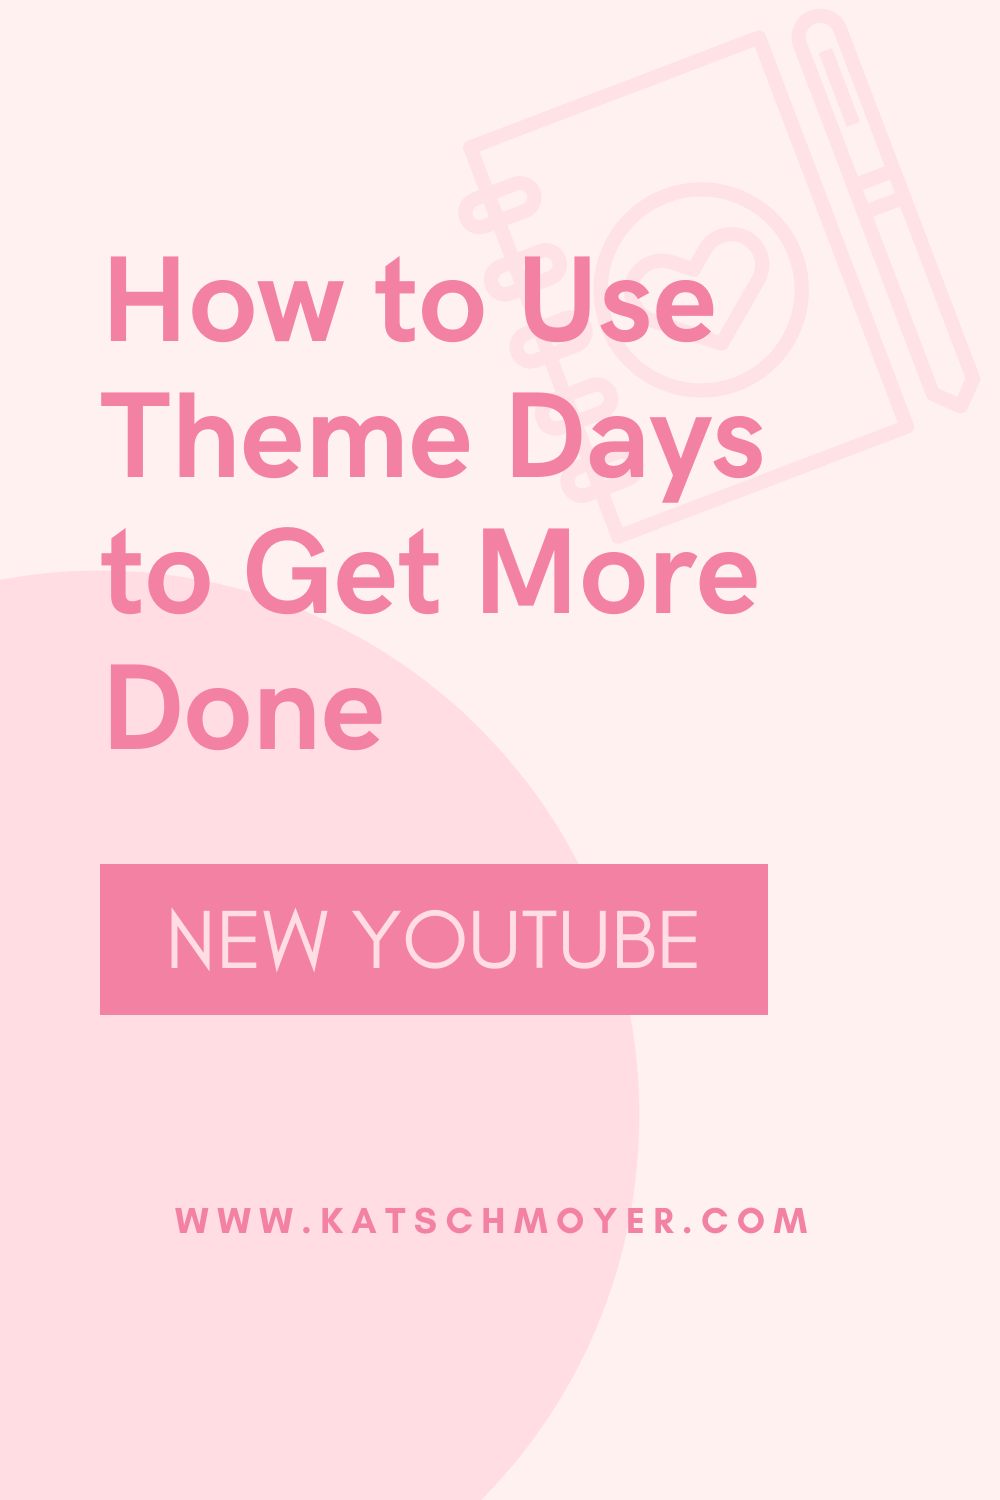 How to Use Theme Days to Get More Done